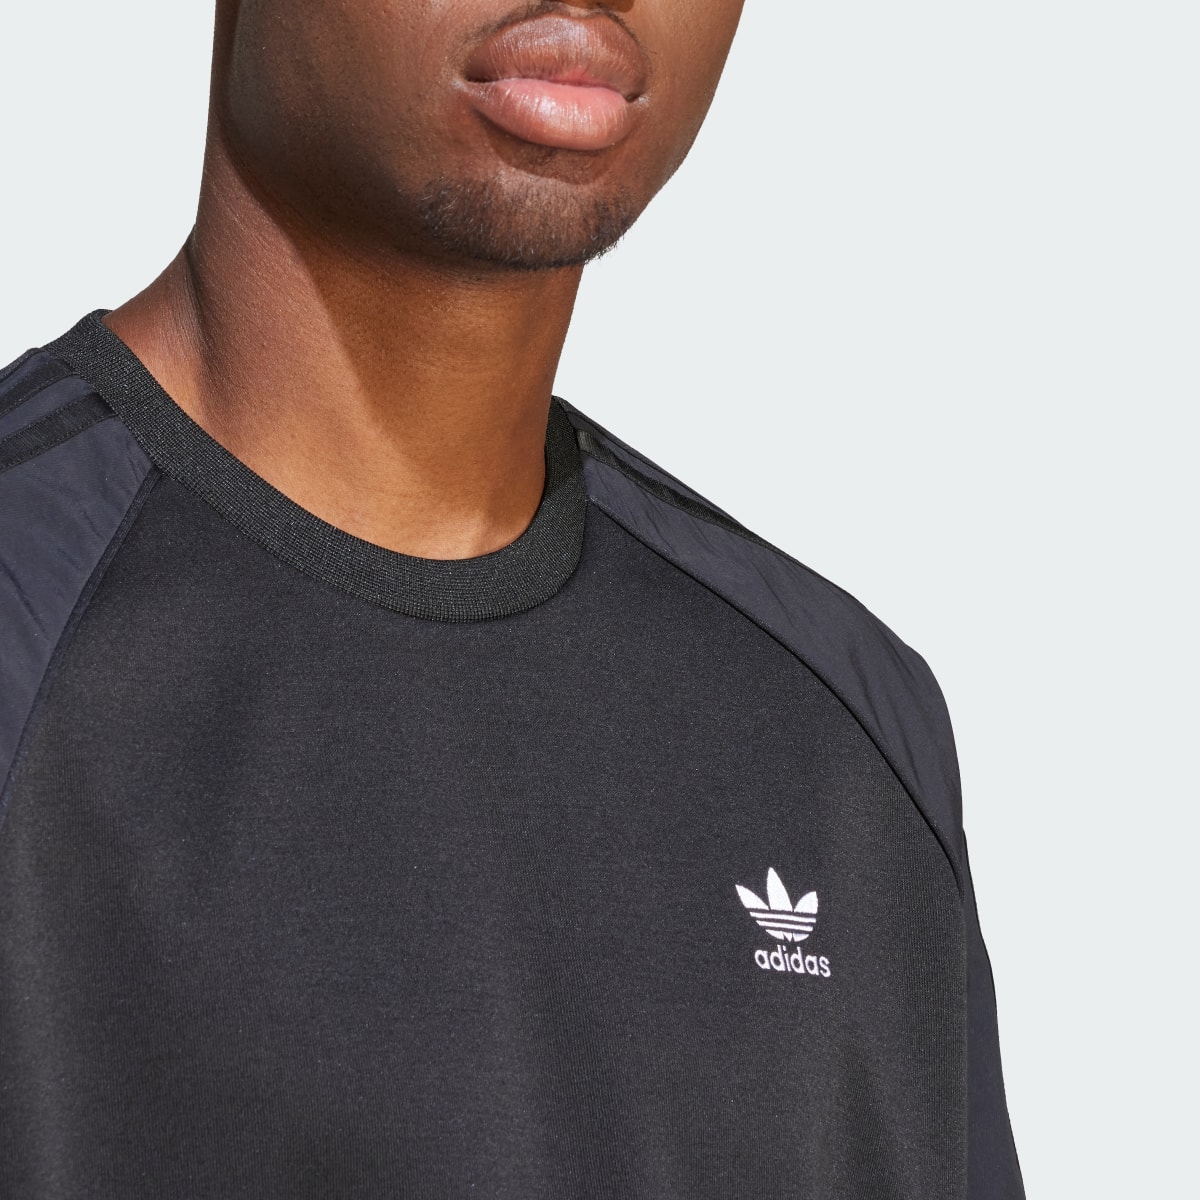 Adidas Adicolor Re-Pro SST Material Mix Tee. 6